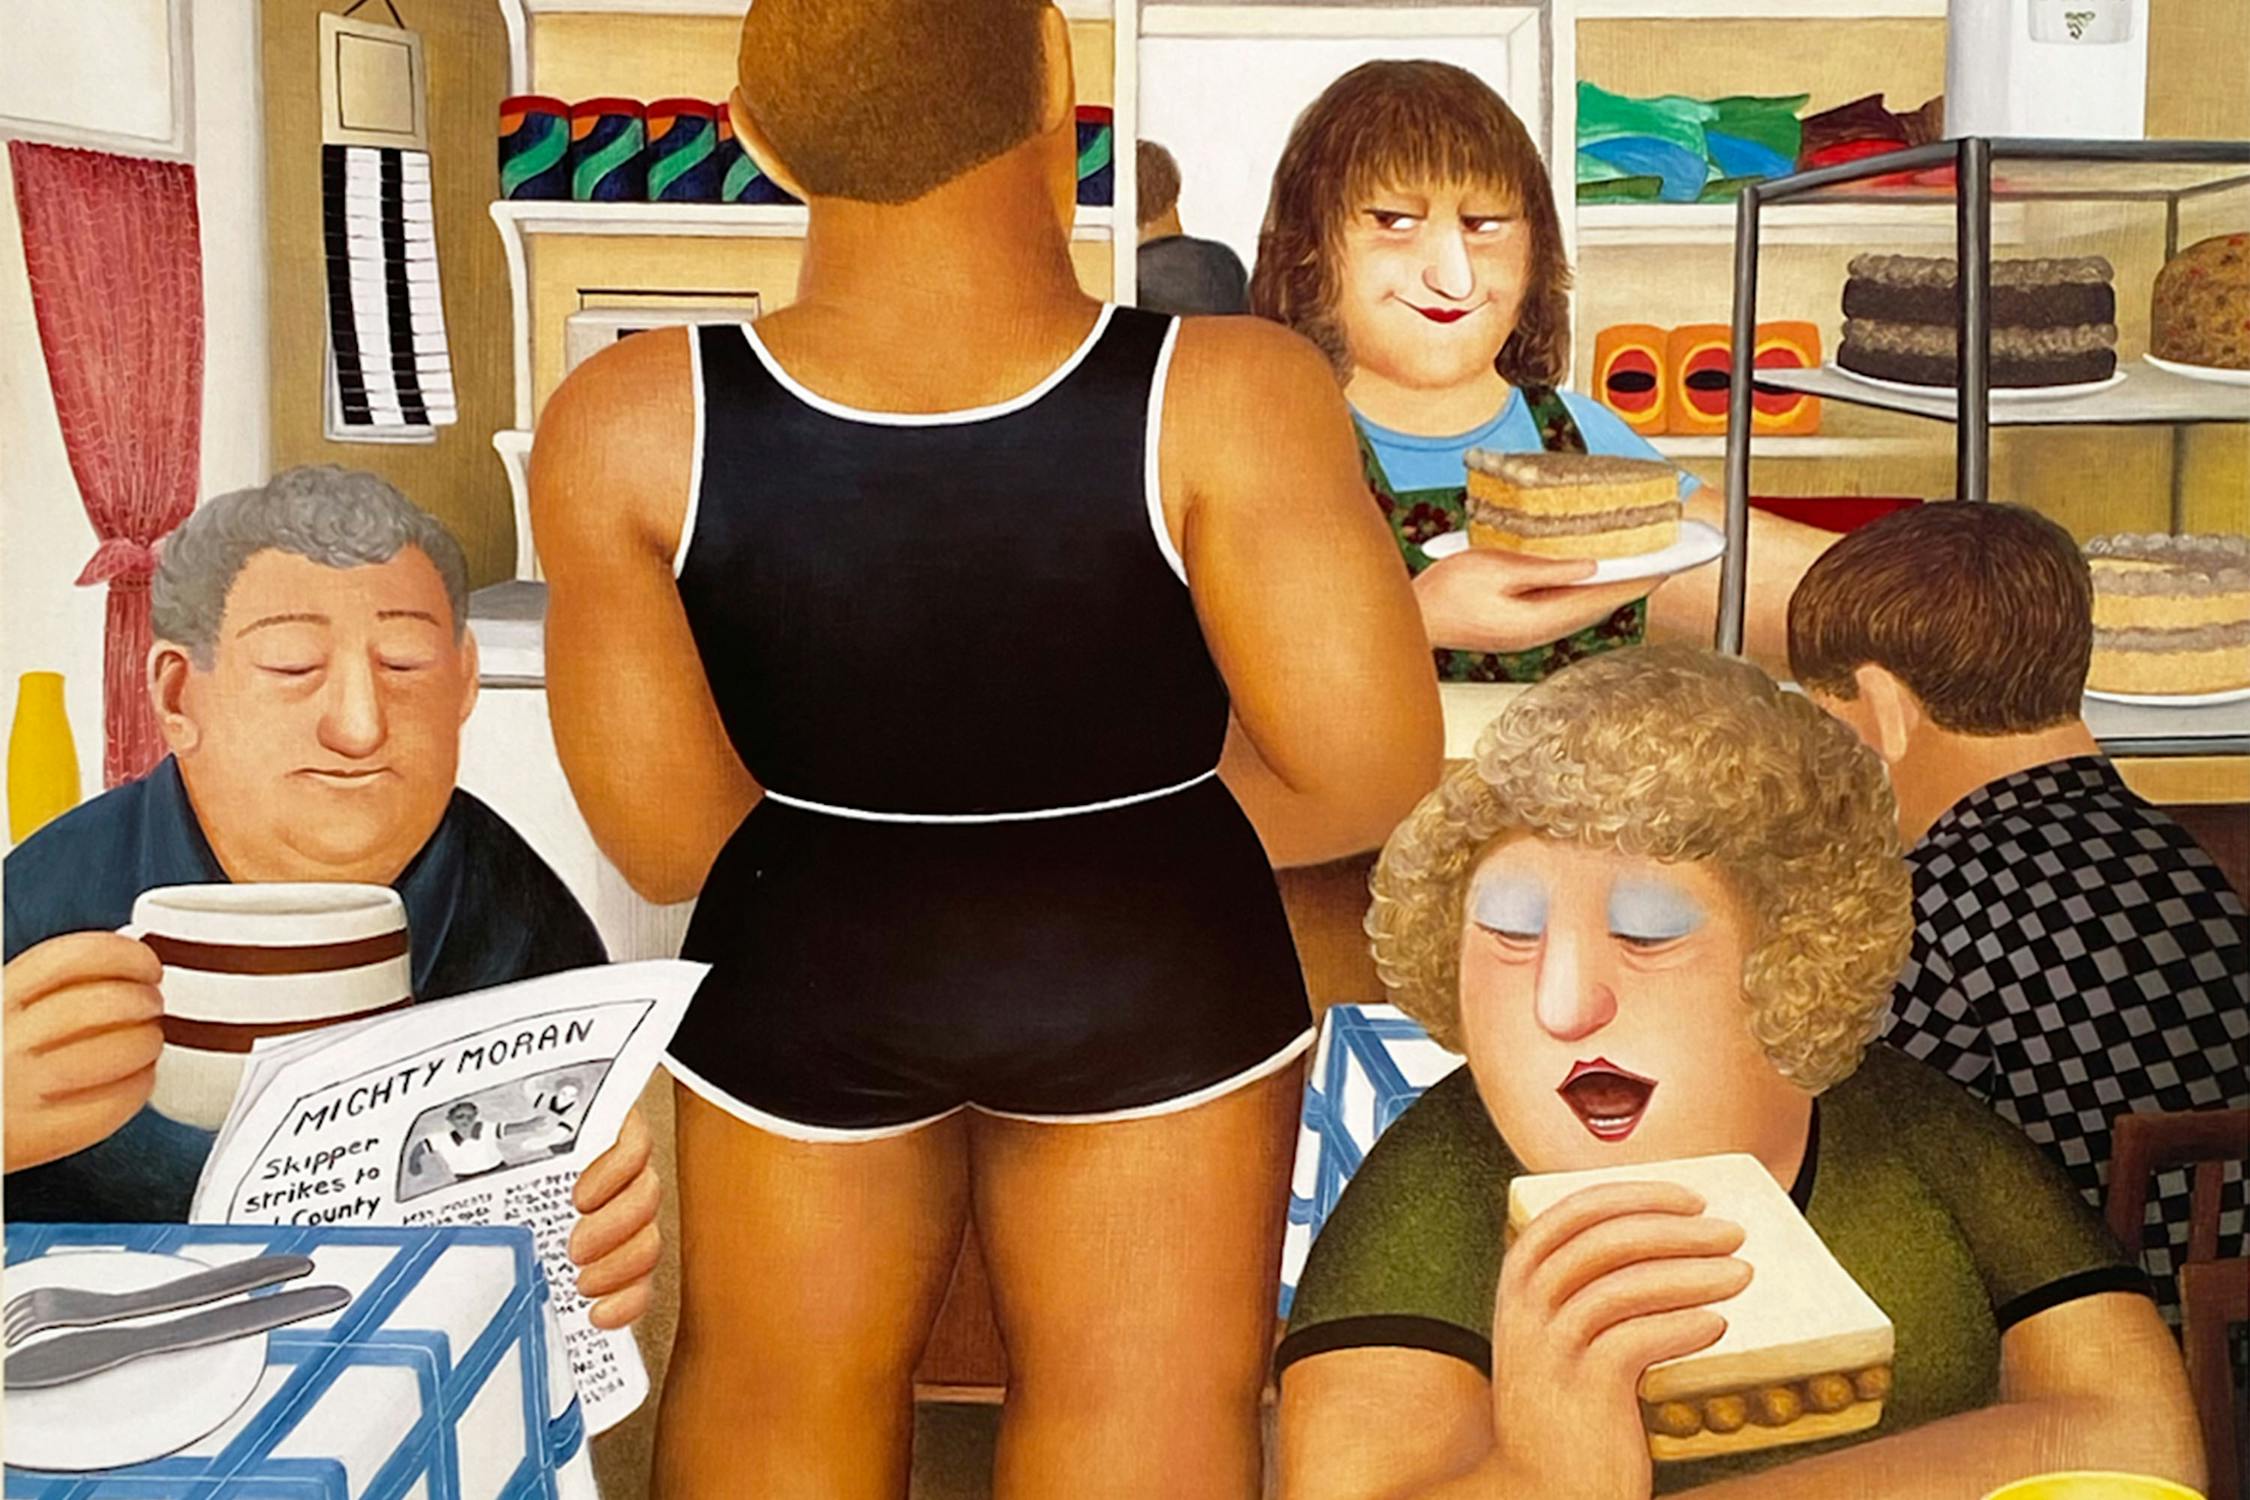 A Beryl Cook painting depicting a busy cafe scene. There is man wearing a black vest and shorts who faces from the viewer, and in the foreground a women eats a sausage sandwich